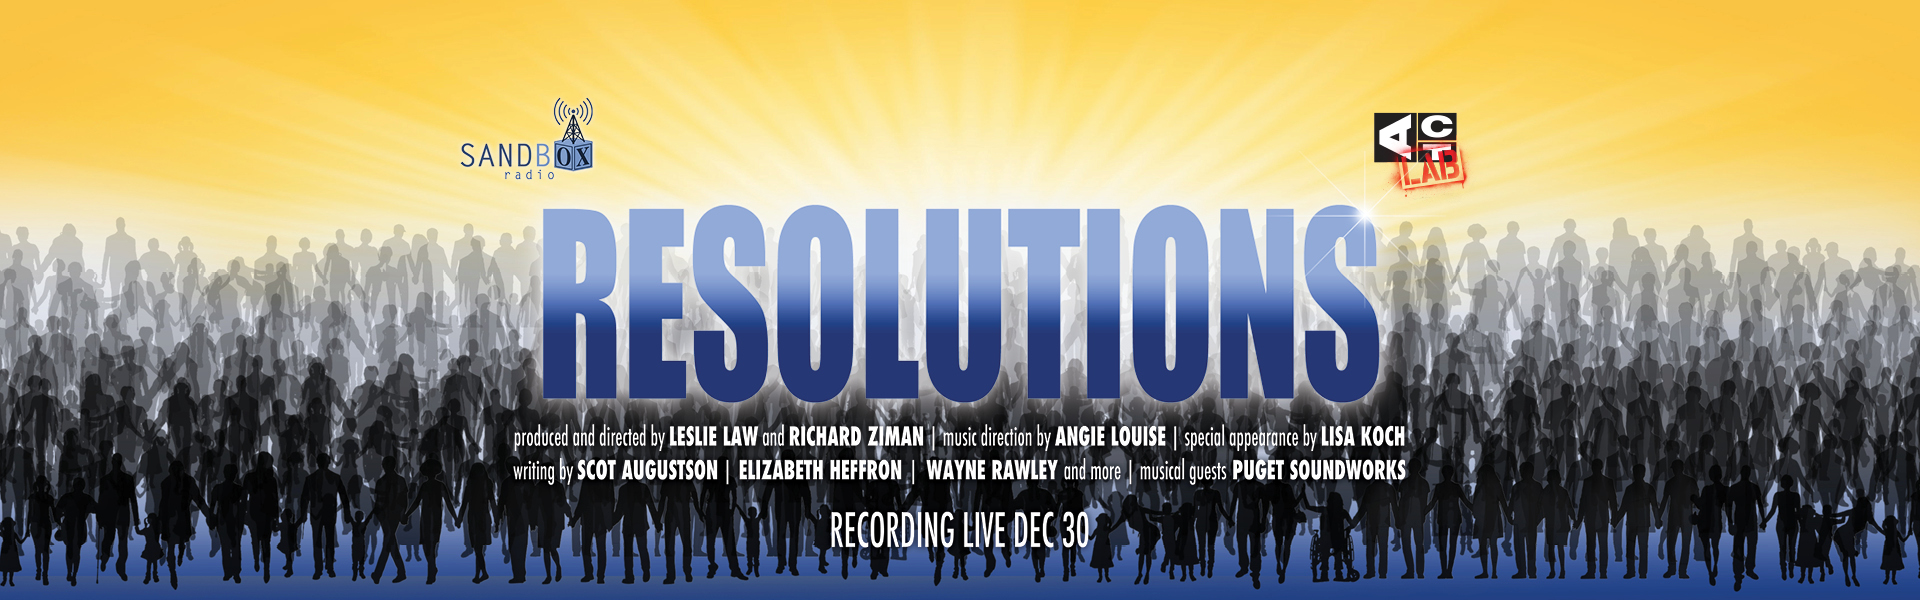 Resolutions Banner Image